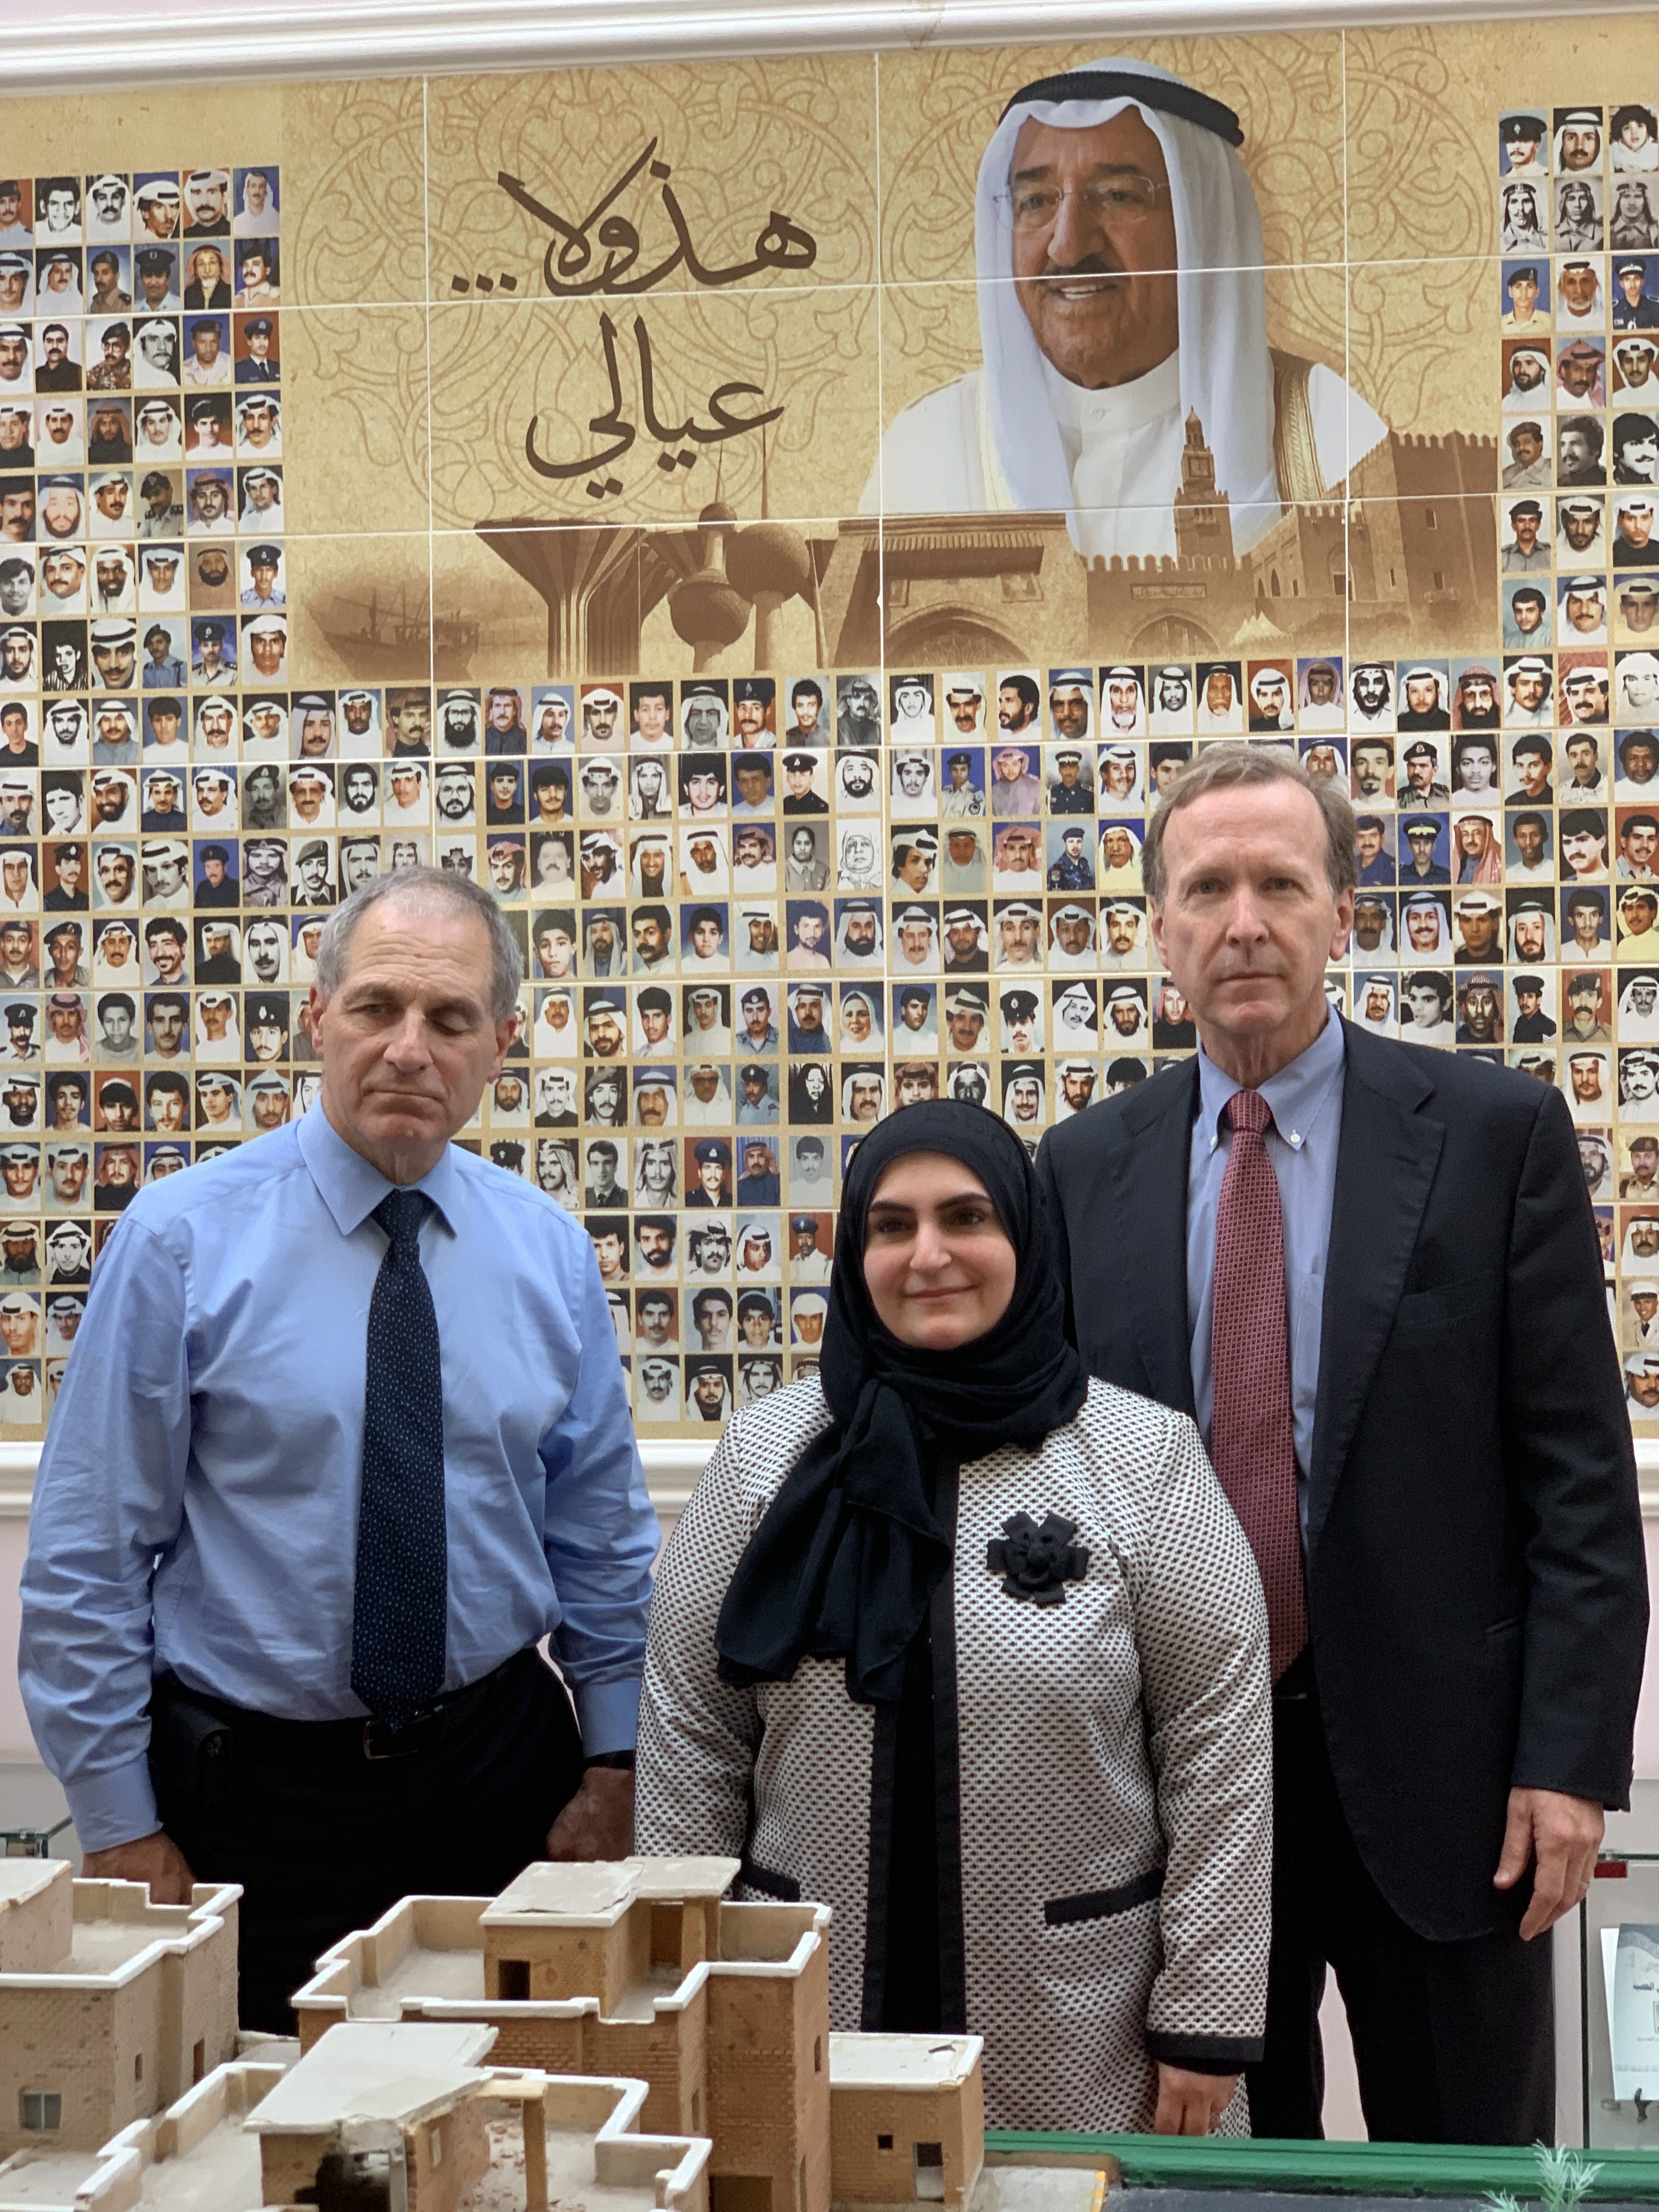 Ex-FBI Director Louis Freeh (L) and Neil Bush (R) visit the Al Qurain Martyrs Museum, a memorial to the Kuwait resistance to the Iraq invasion, on March 23, 2019. Courtesy KGL Investment